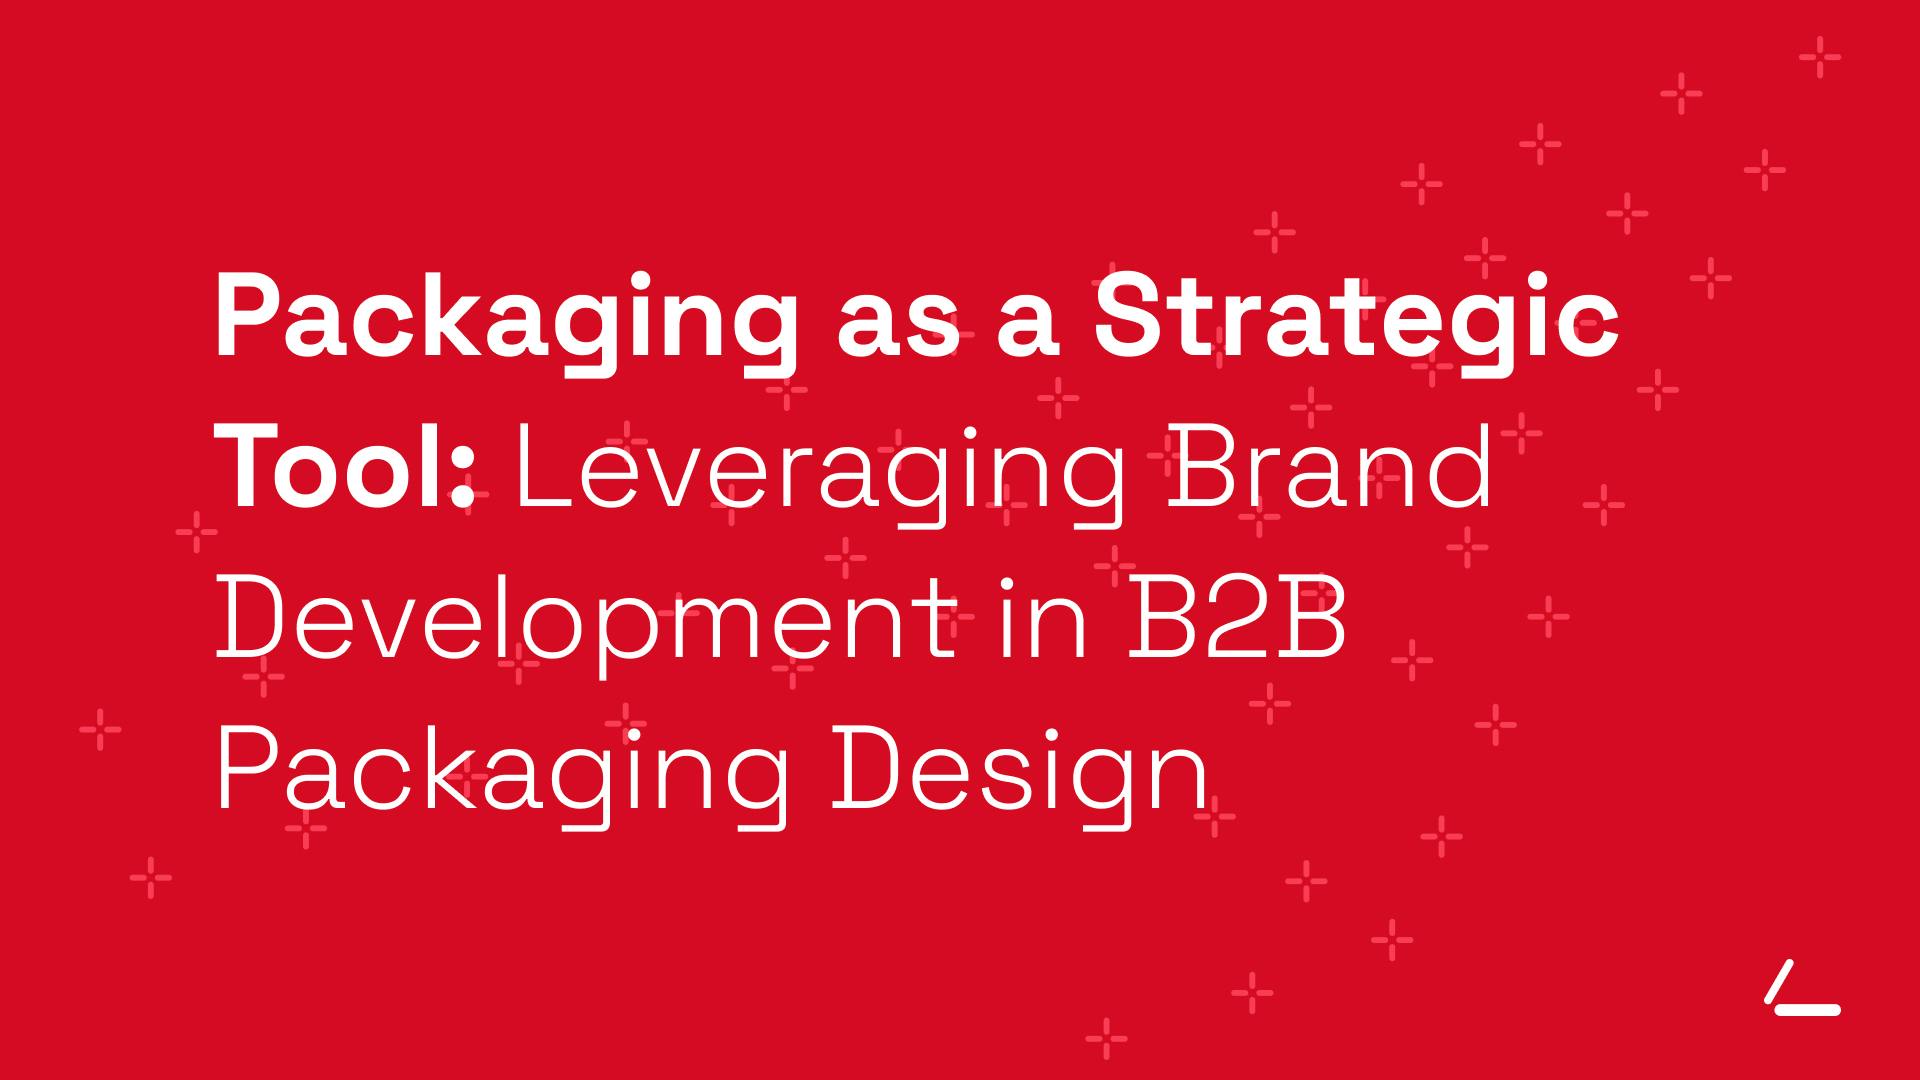 SEO Article Header - Red background with text about Brand Development Packaging